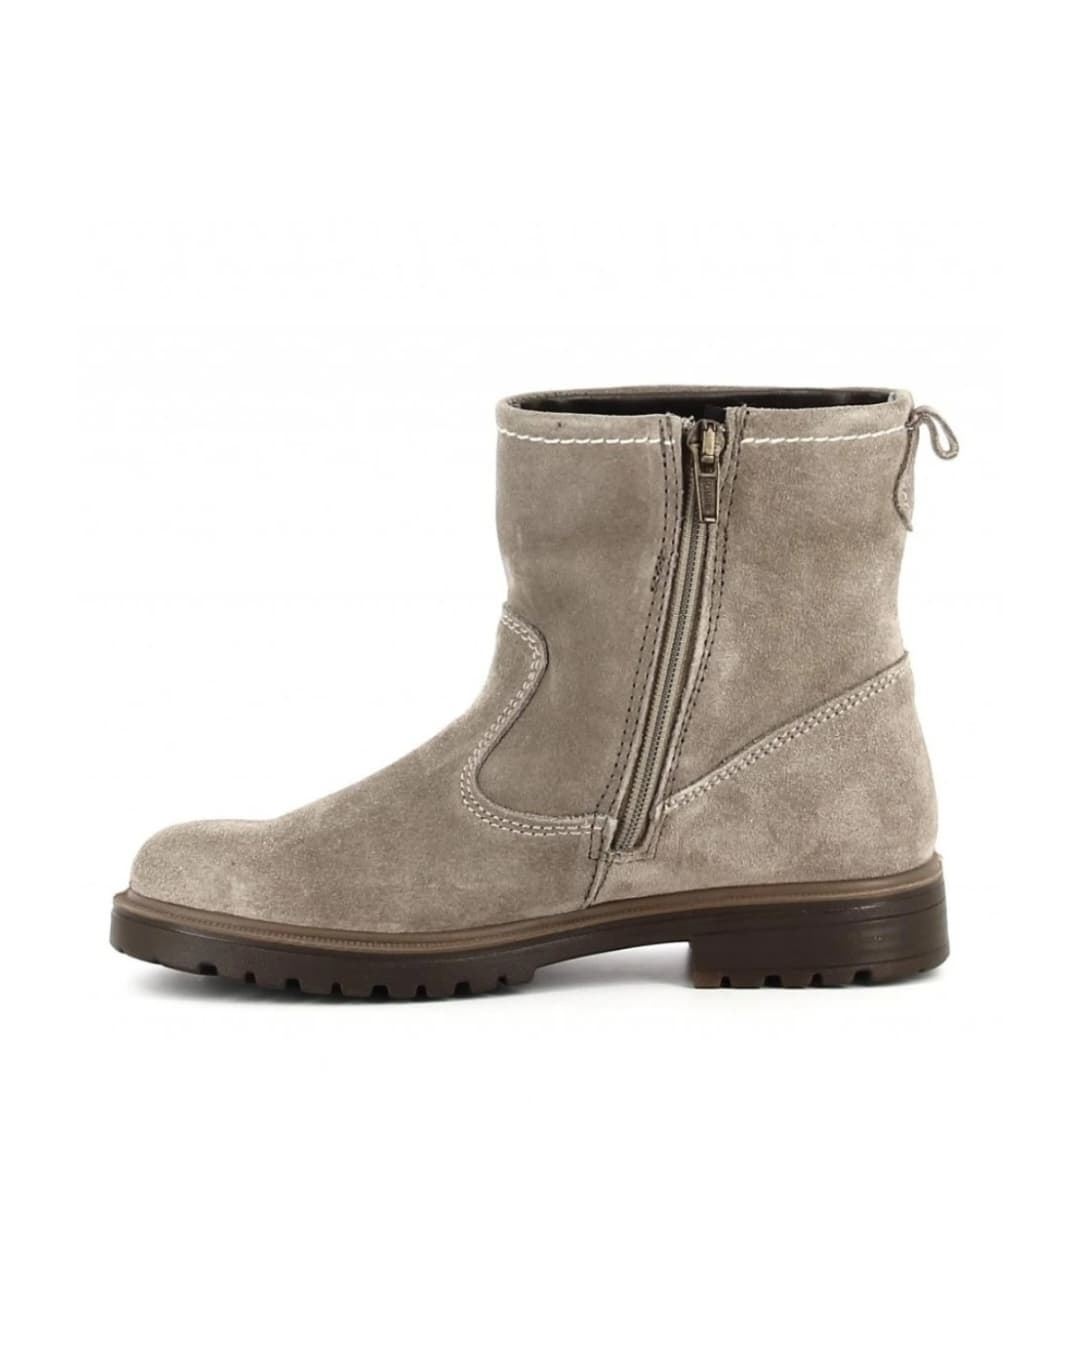 Primigi Gore-tex Ankle Boot for Girls Taupe - Image 4